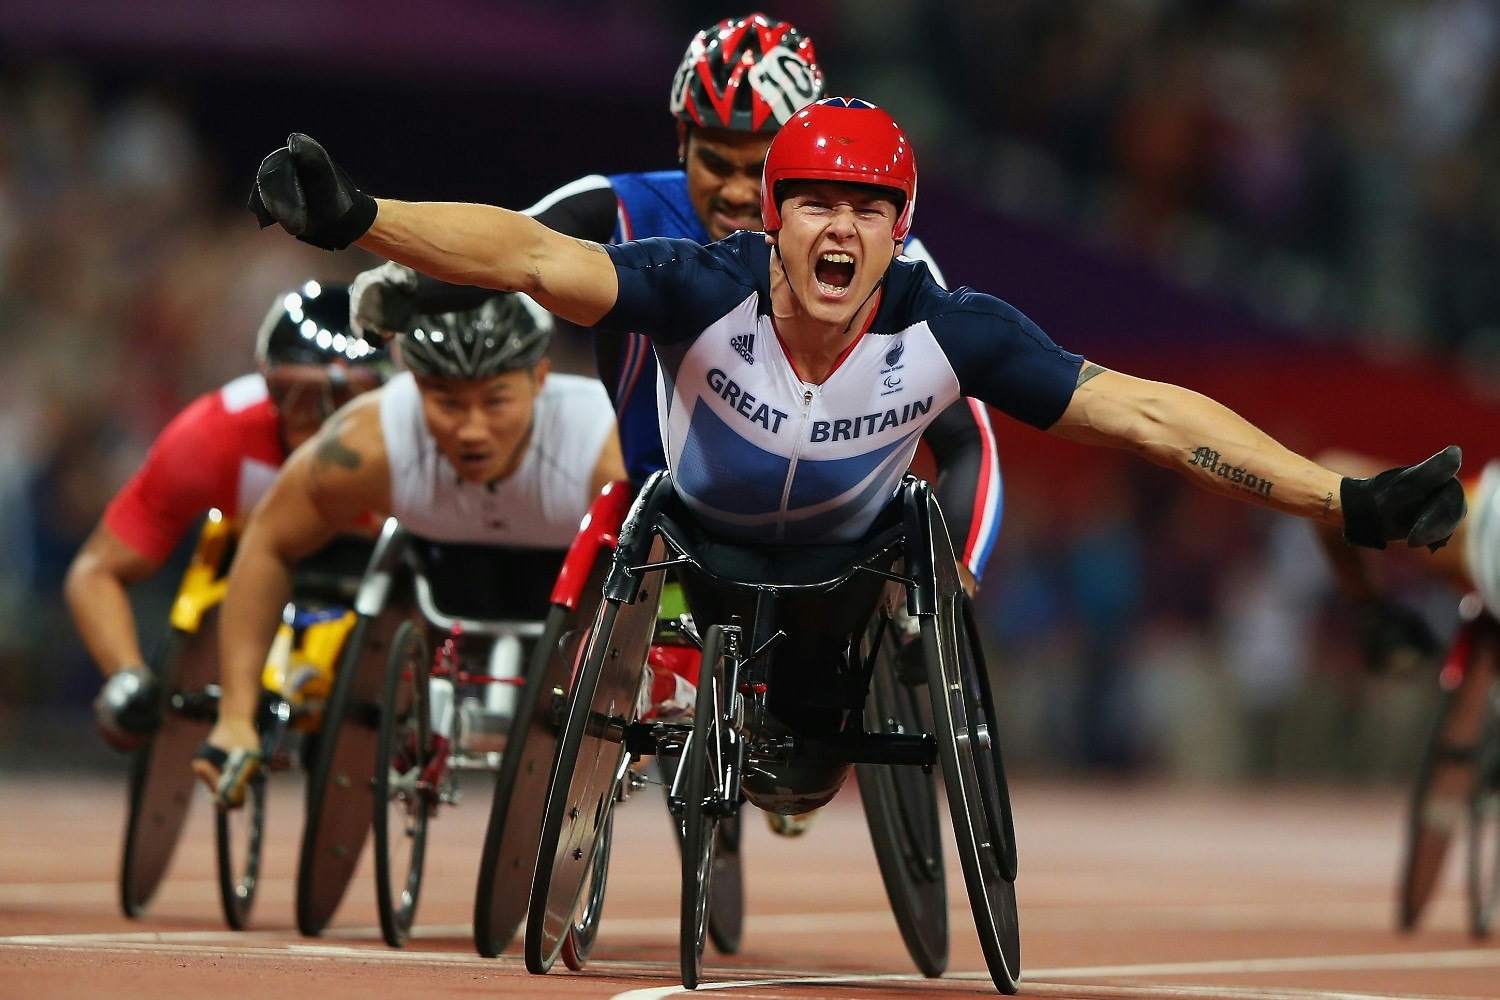 David Weir of Great Britain celebrates winning the Men's 1500m T54 final at the London 2012 Paralympic Games